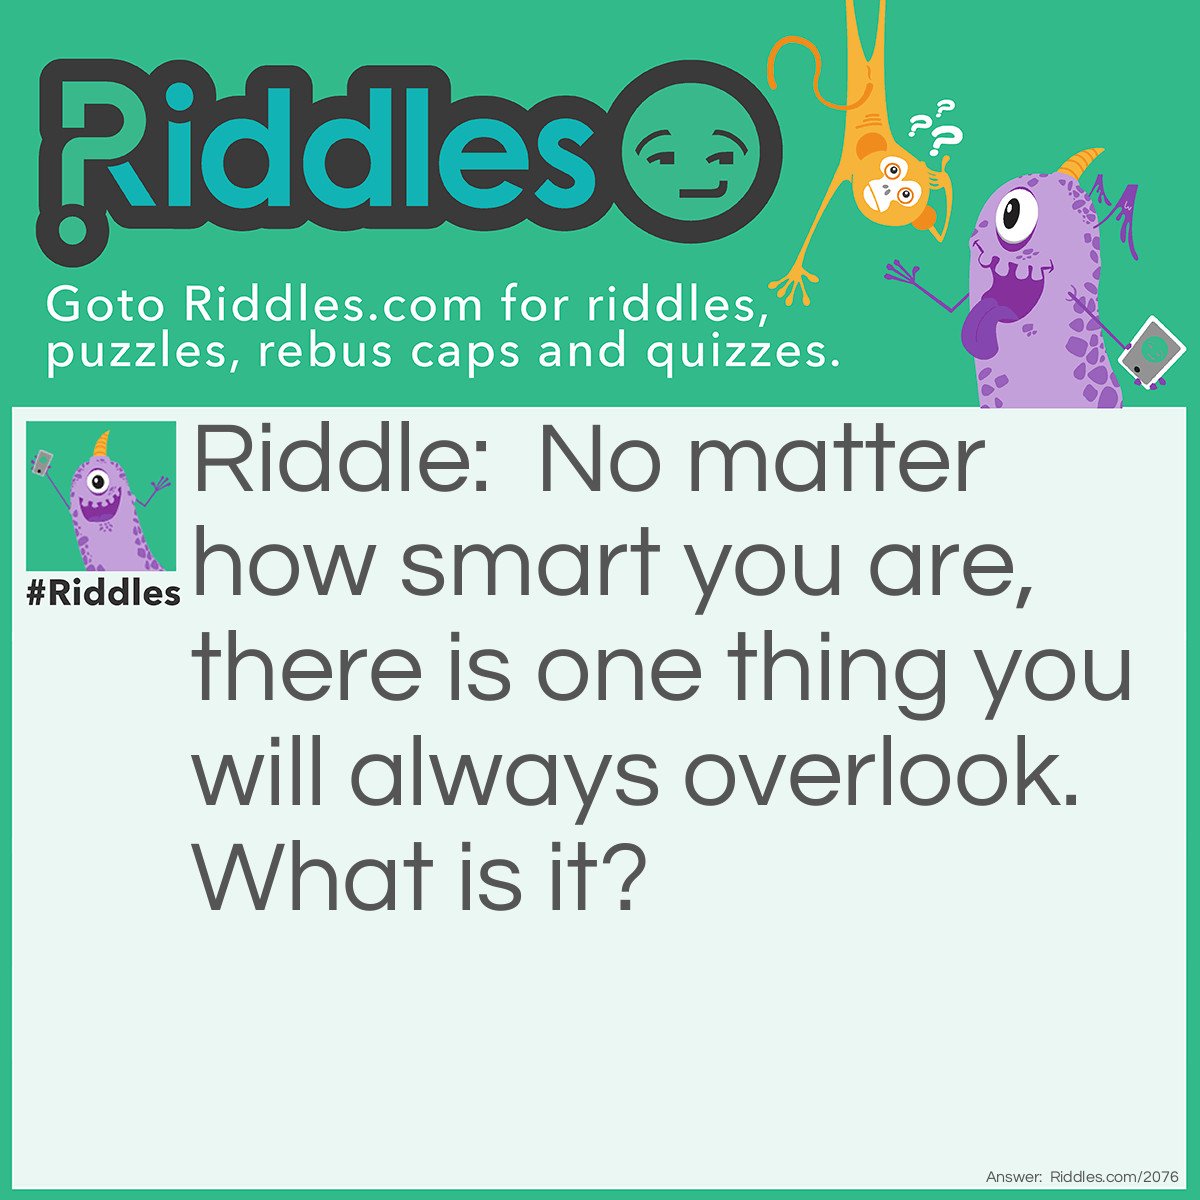 Riddle: No matter how smart you are, there is one thing you will always overlook. What is it? Answer: Your own nose.